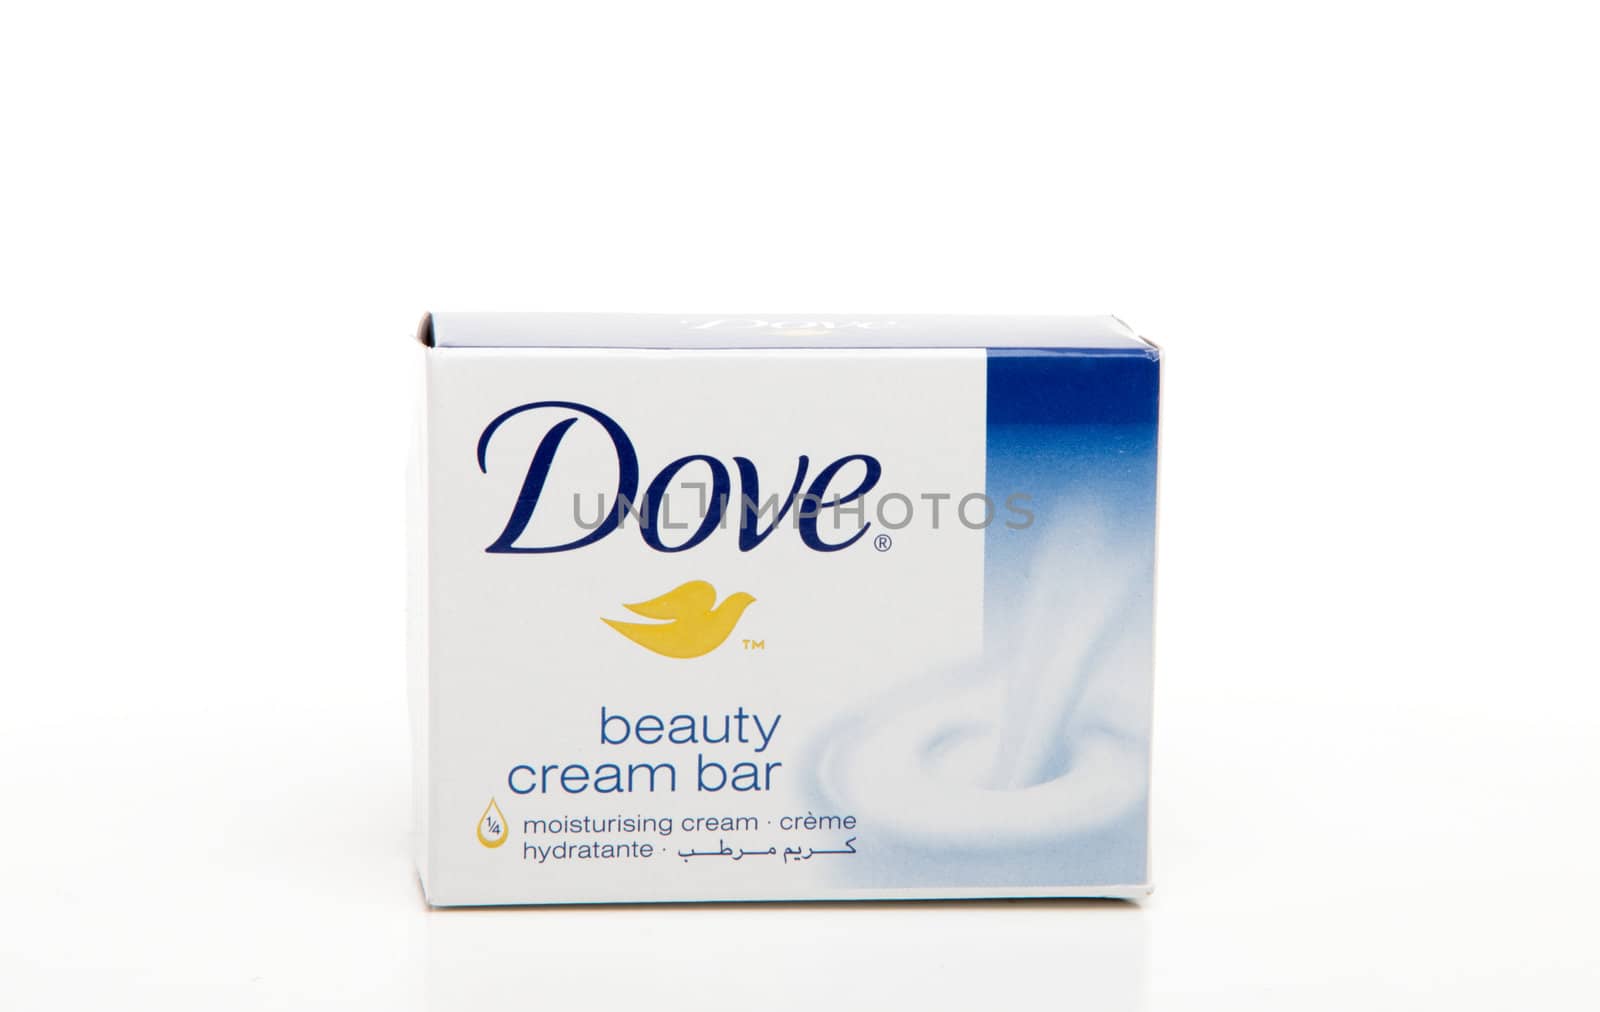 Dove cream soap bar.  Dove soap with 1/4 moisturizing lotion hydrates and nourishes skin.  Dove is manufactured by Unilever.  White background.  Editorial use Only.